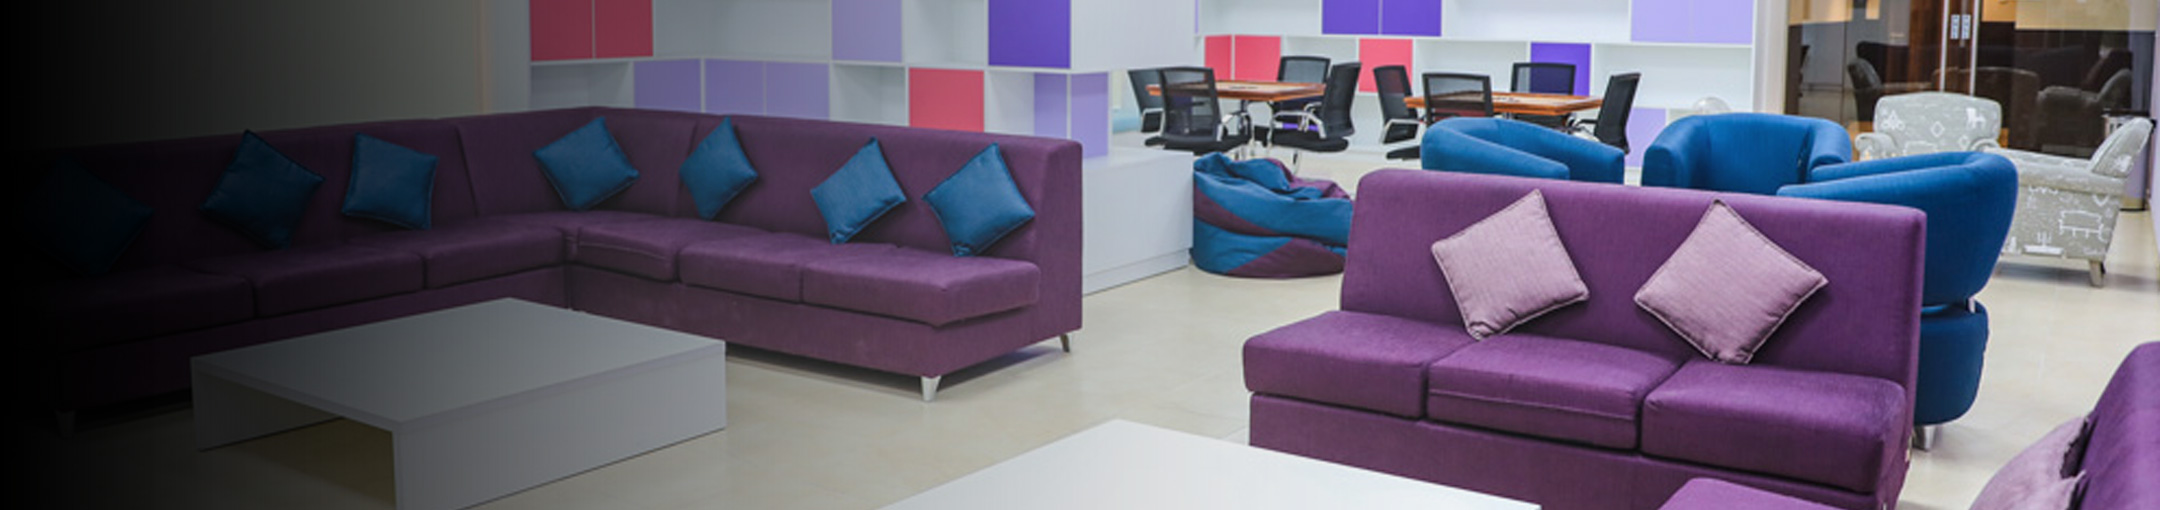 Purple sofa in a student lounge